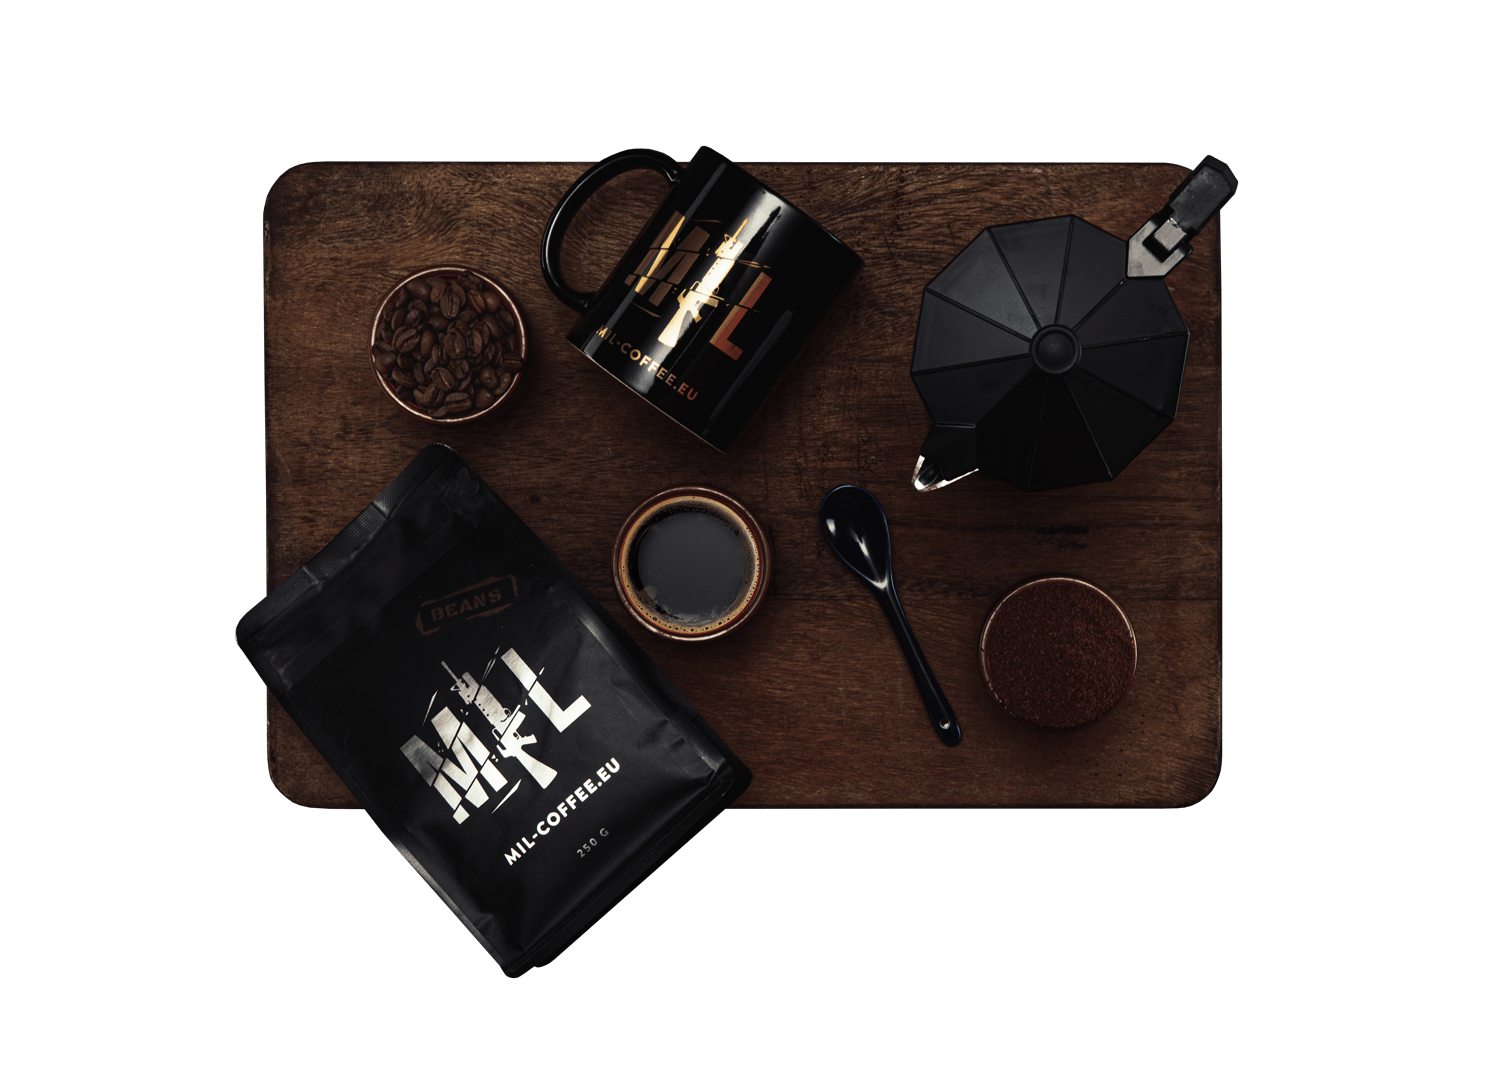 All products made by Mil-Coffee including mugs, coffee beans, etc.